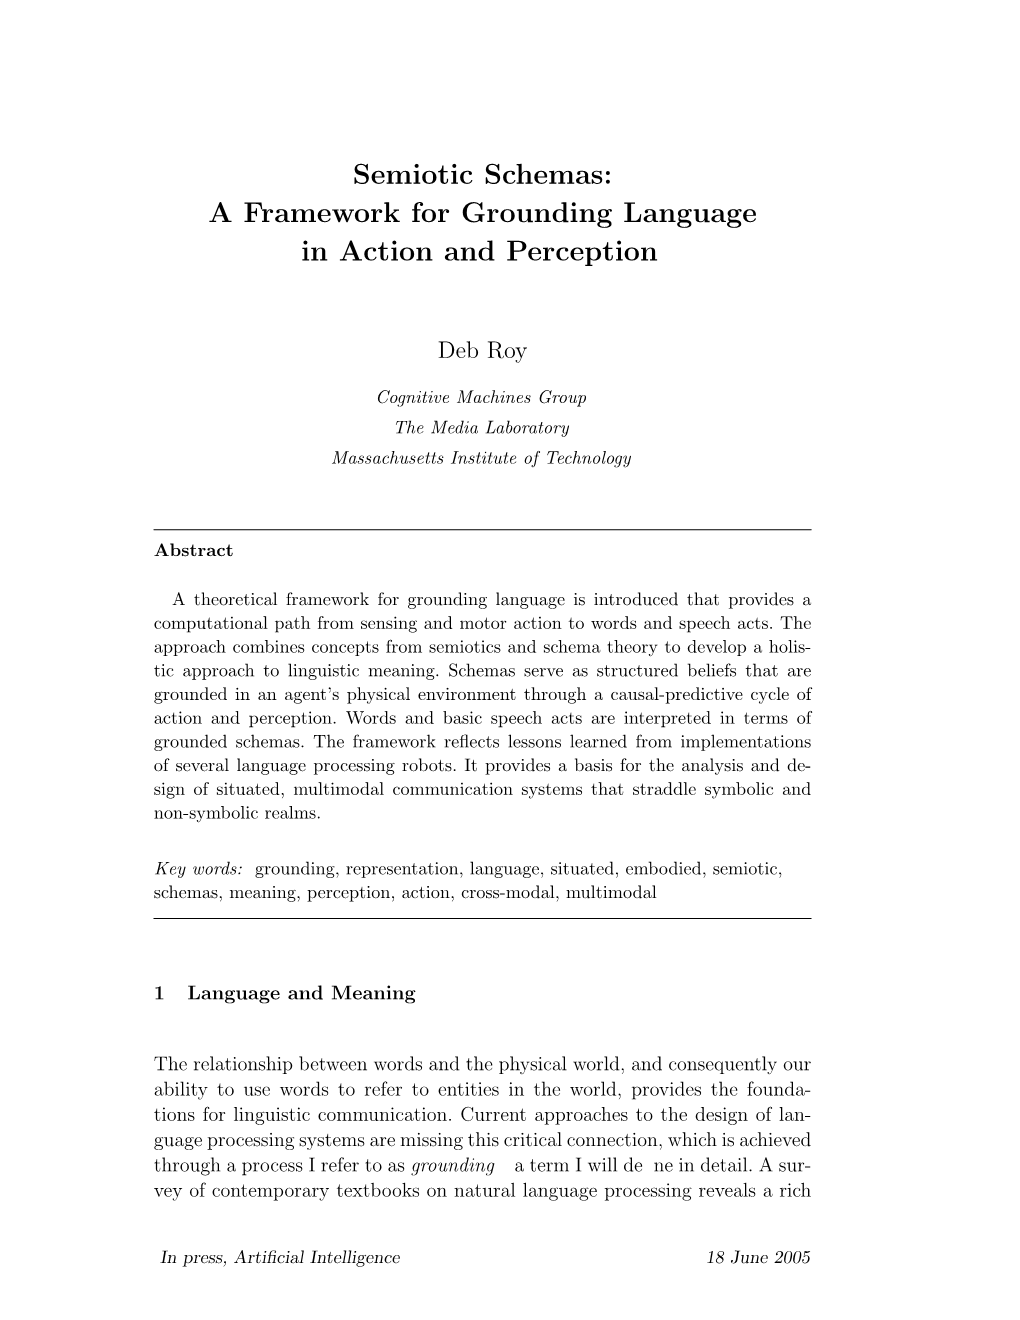 Semiotic Schemas: a Framework for Grounding Language in Action and Perception